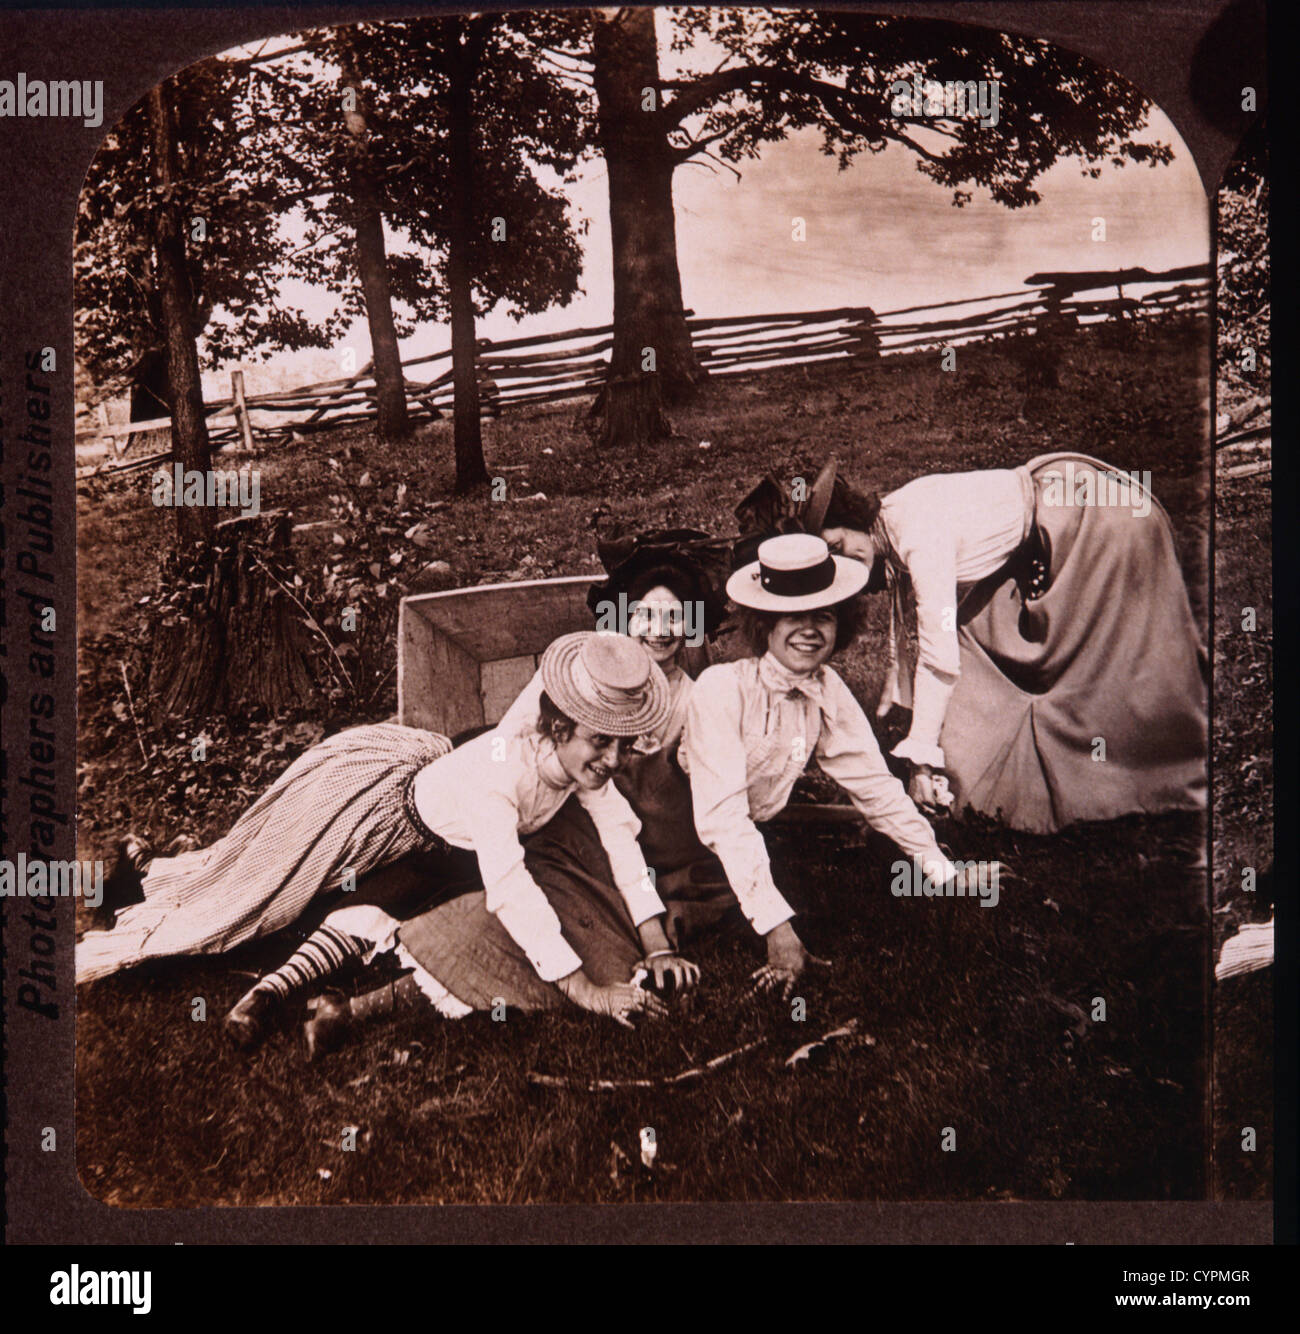 Women Falling out of Wheel Barrow, Stereo Photograph, 1905 Stock Photo